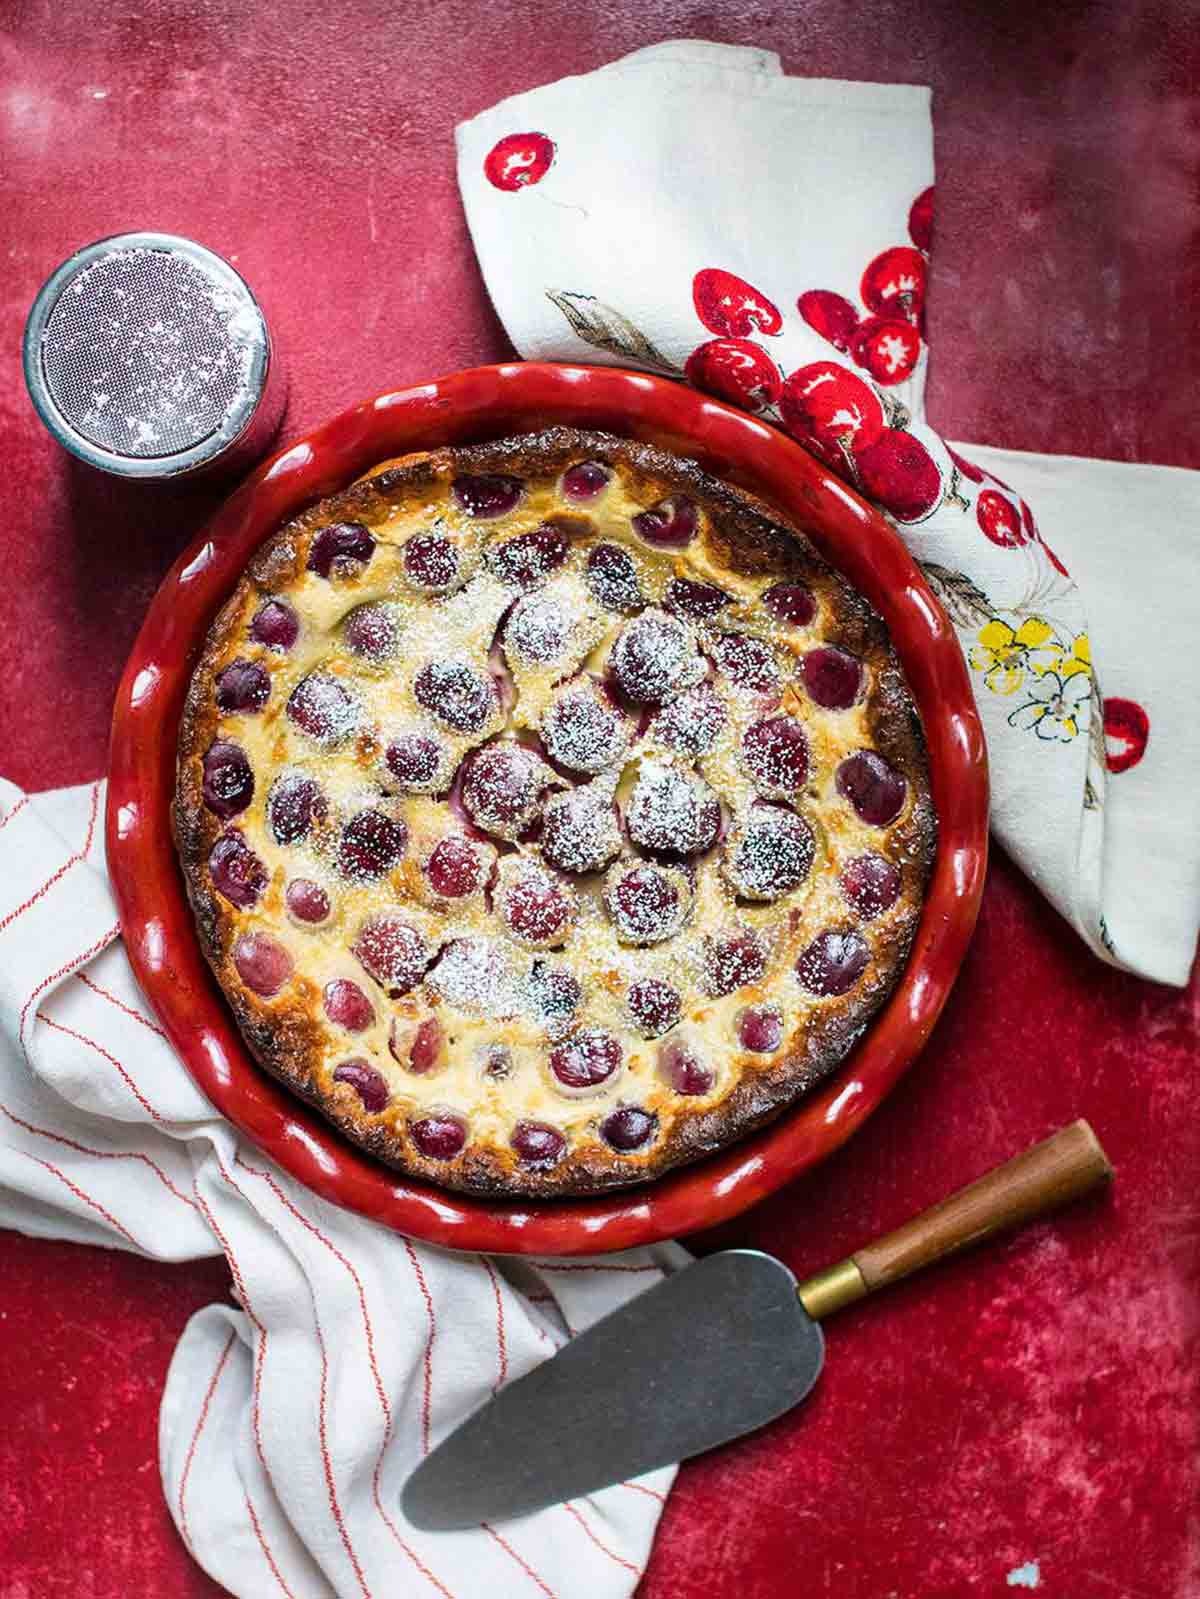 A cherry clafouti in a red dish with cherry dish towels